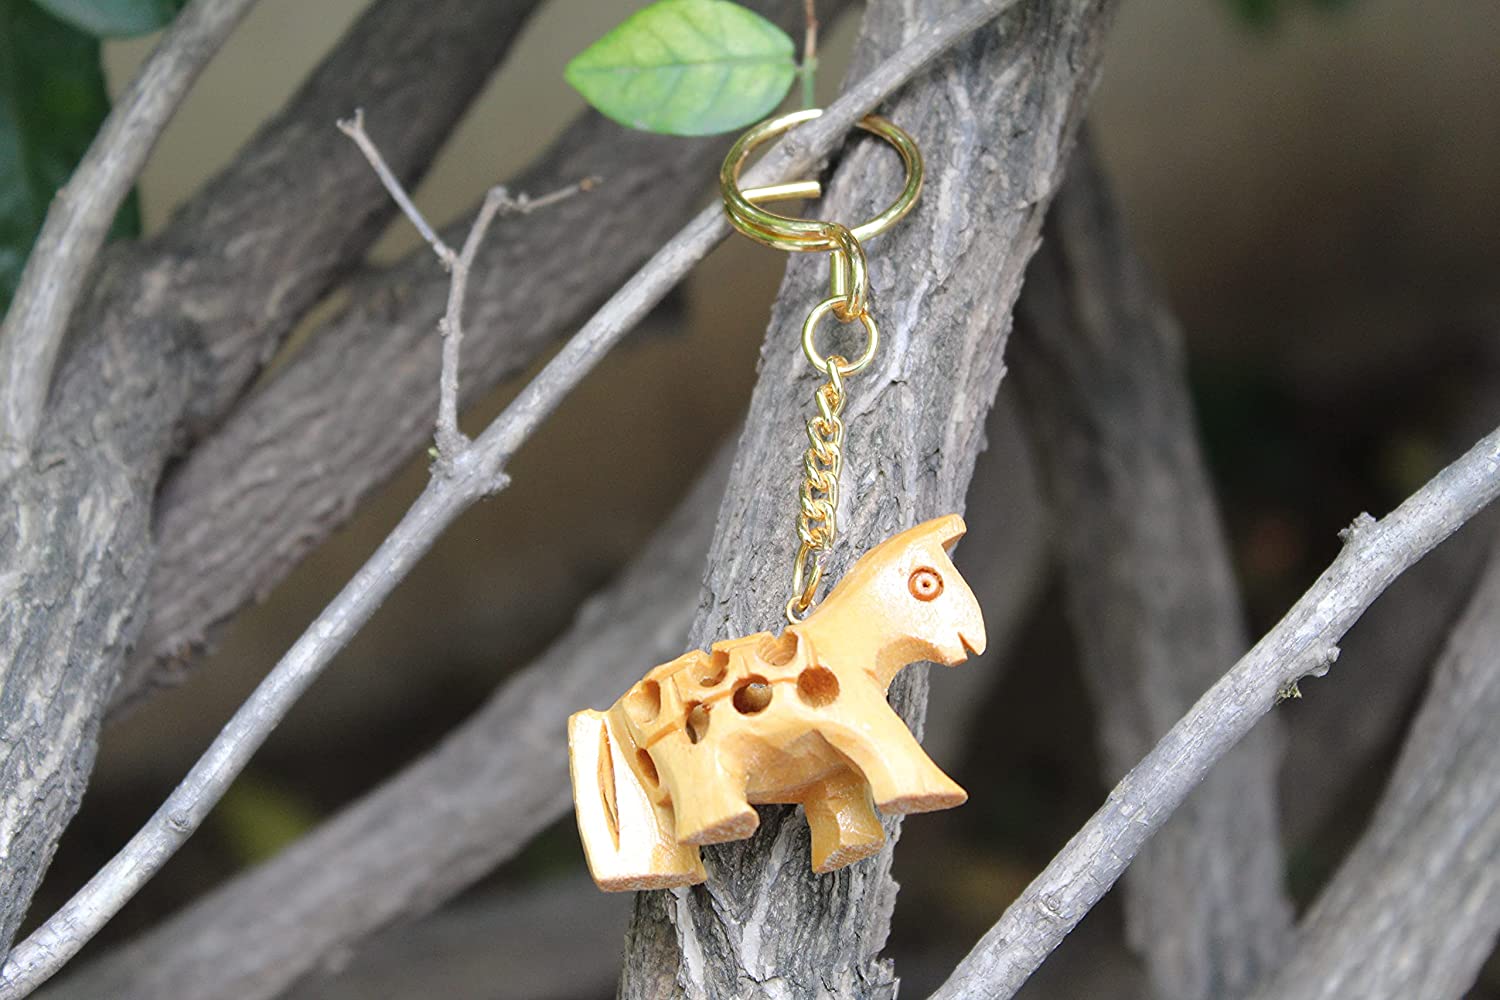 Jet New Handcraft Wooden Horse Keychain, Key Ring keychain access keychain  rings Friendship Divination Thanks Giving - jet-csv